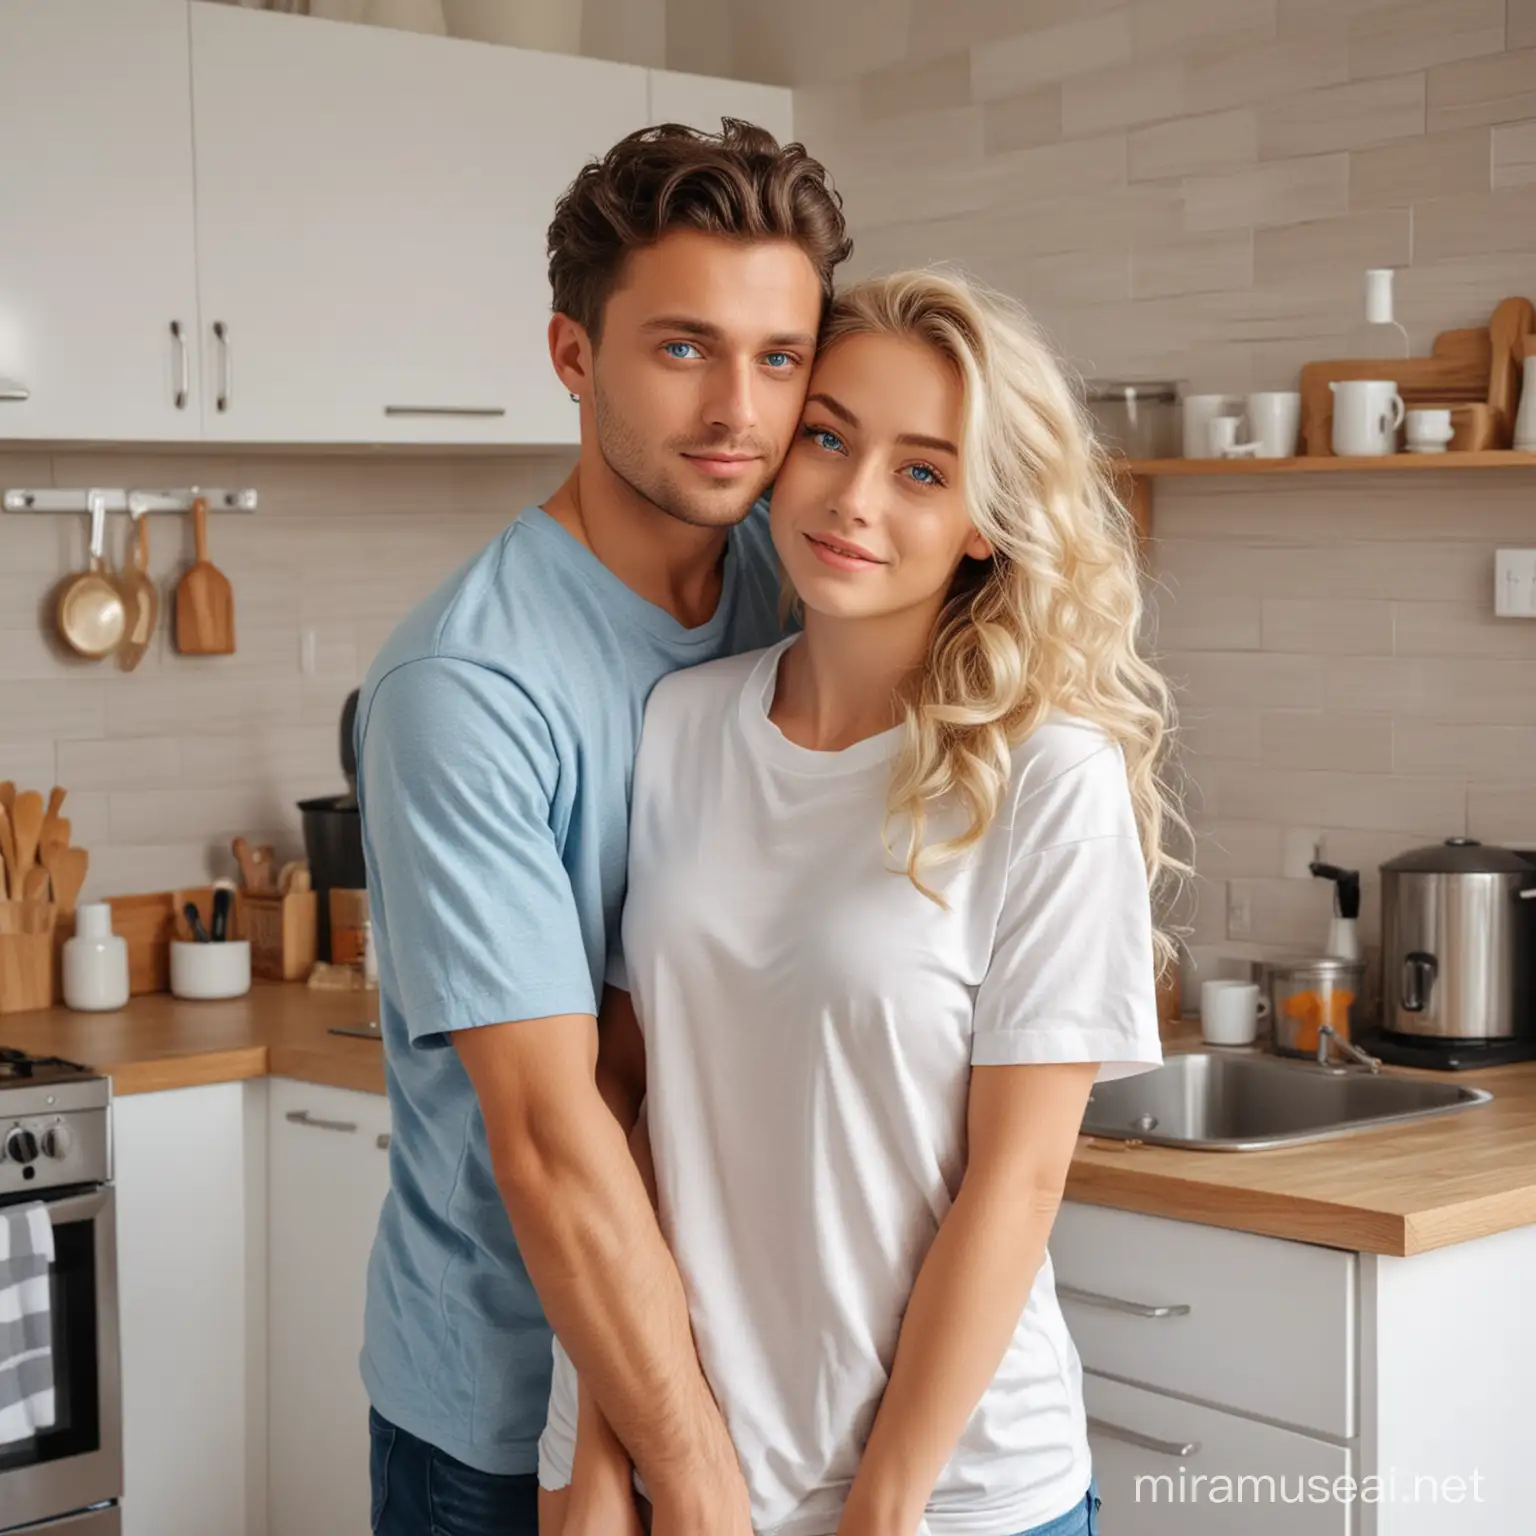 Morning Cooking Blonde Girl and CurlyHaired Guy in Kitchen Embrace